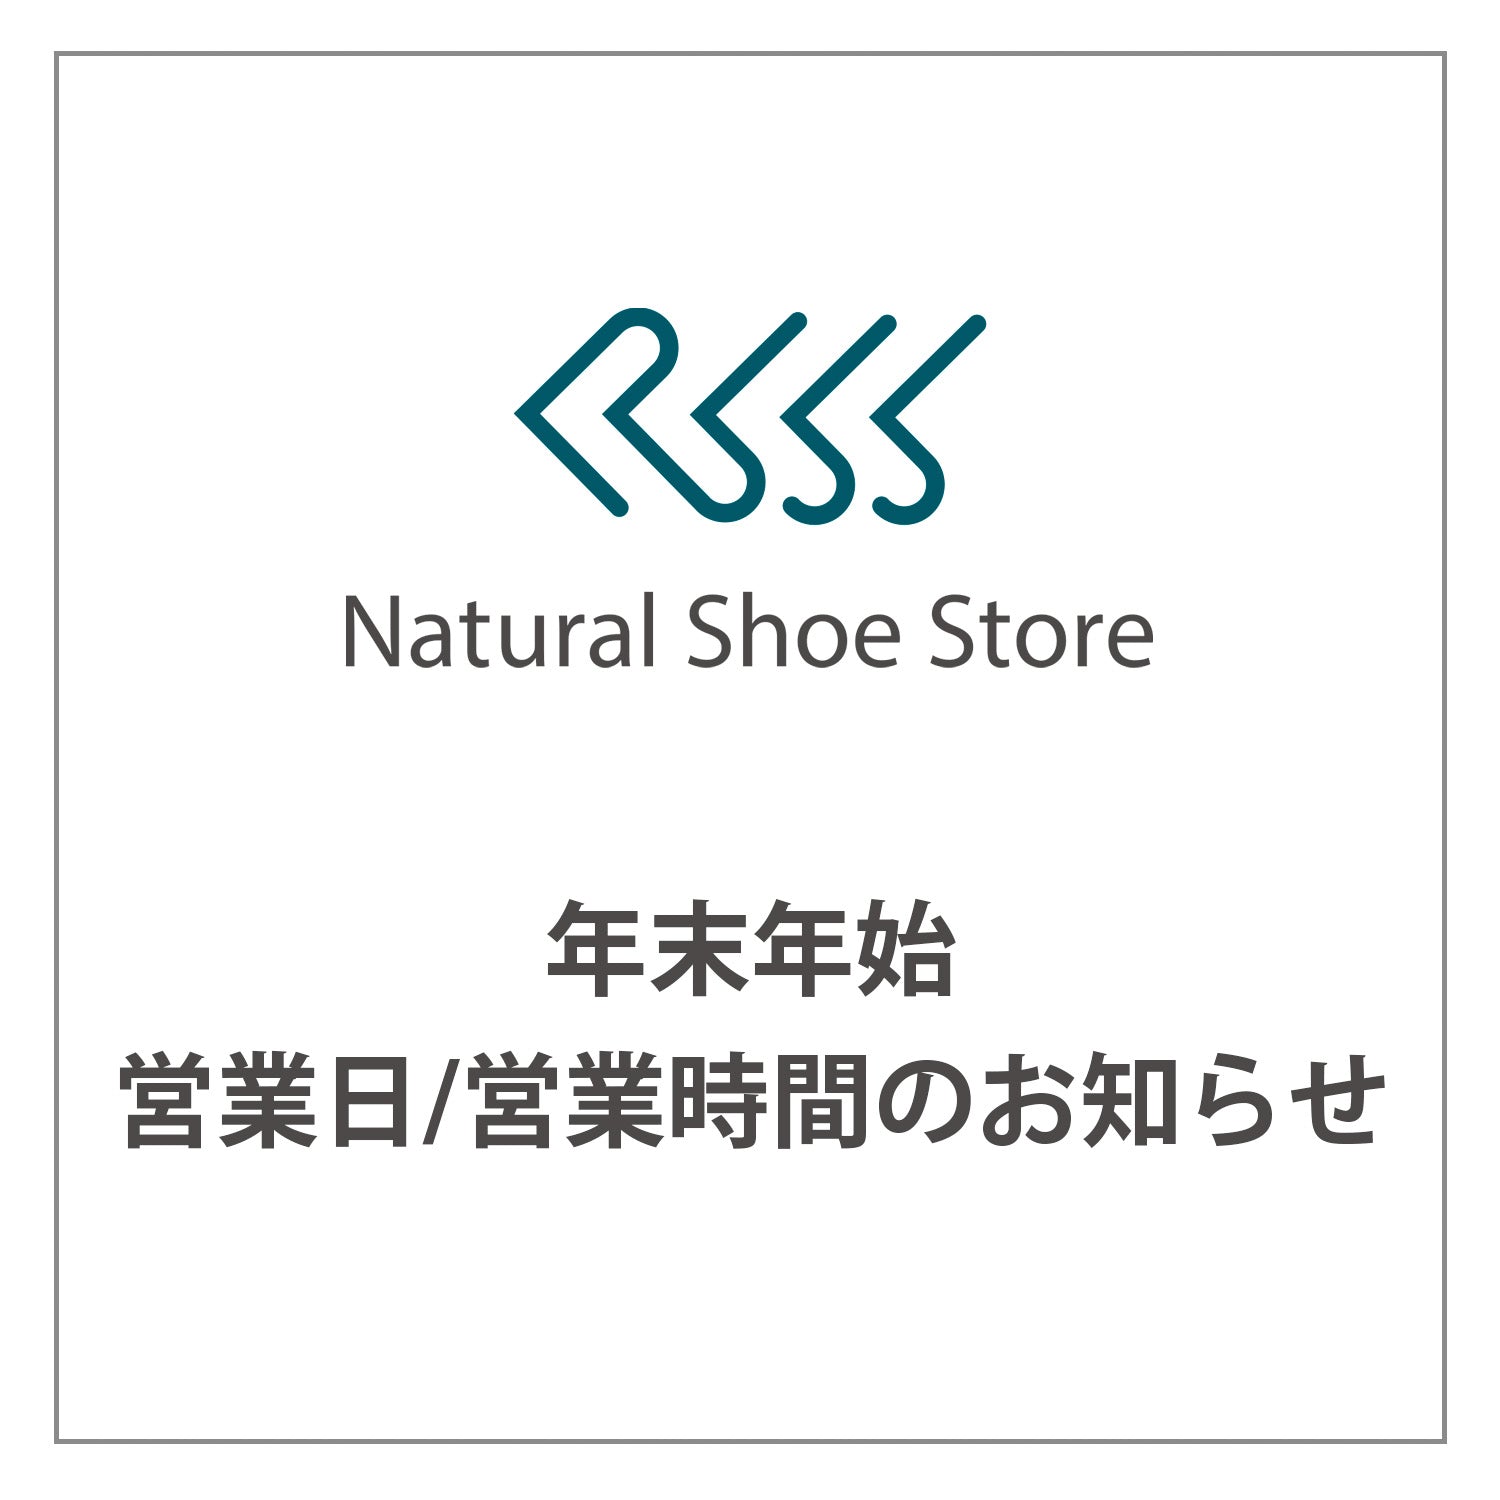 Natural shoe store各店舗の年末年始営業日/営業時間のお知らせ